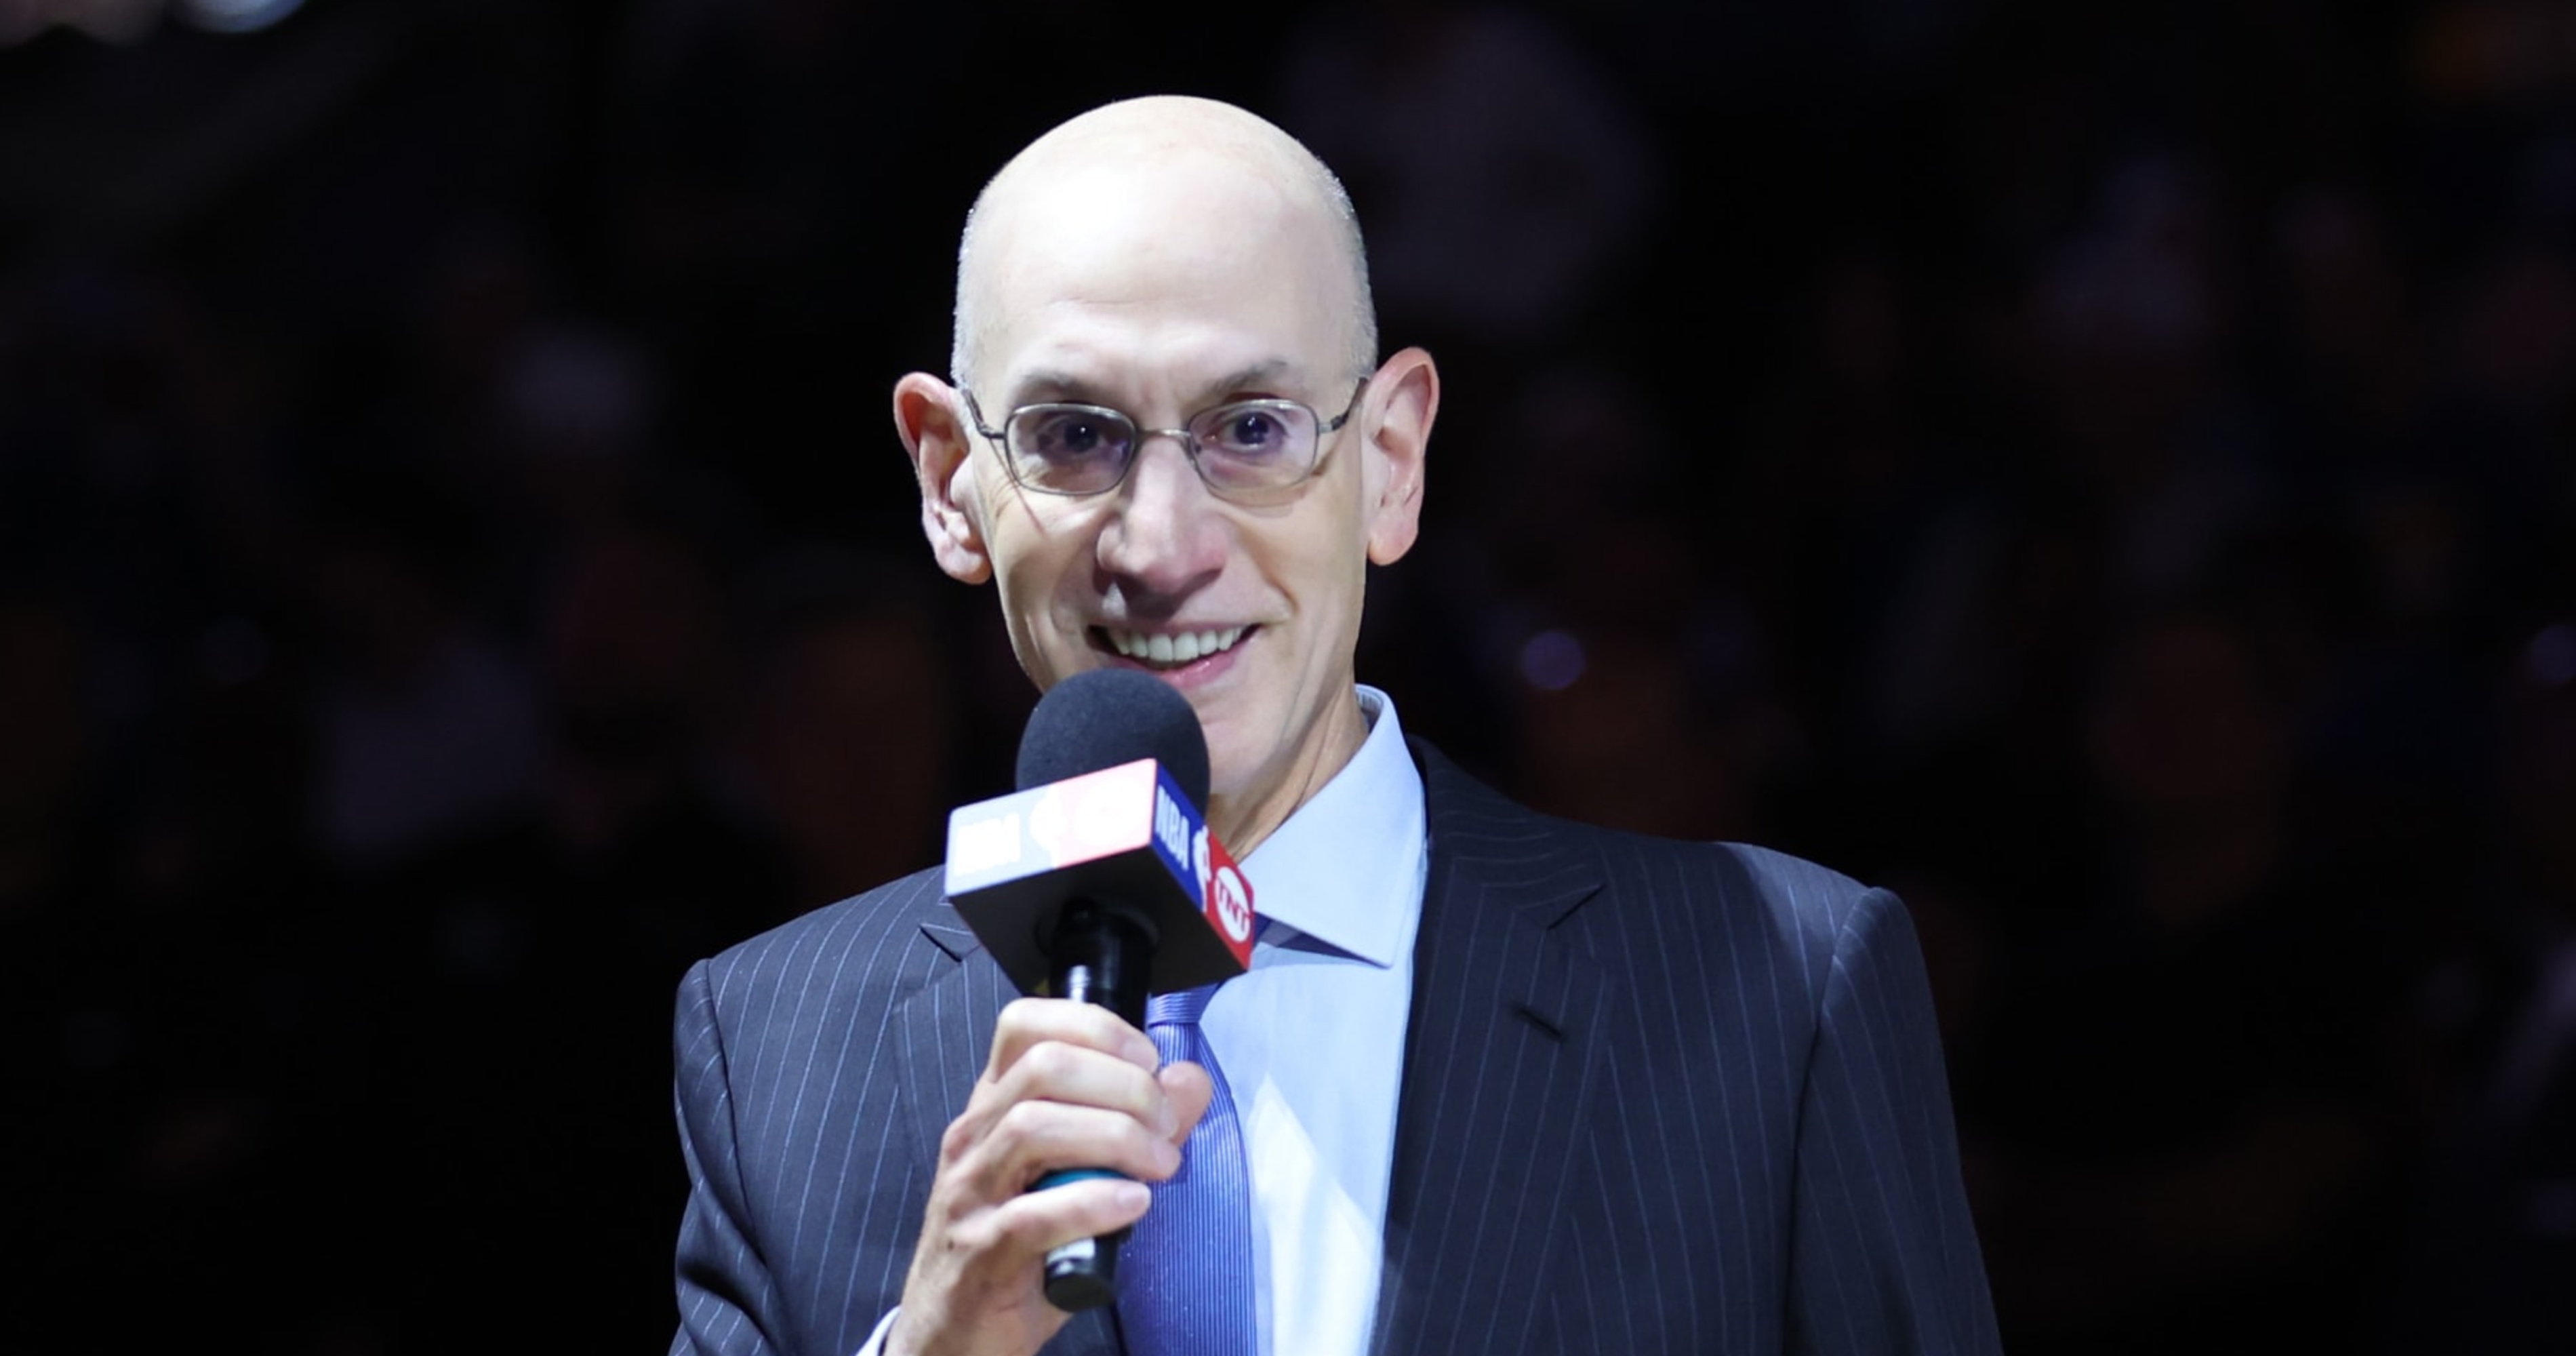 Woj: NBA Pursuing 'Upper Salary Limit' in CBA Negotiations with Players Union